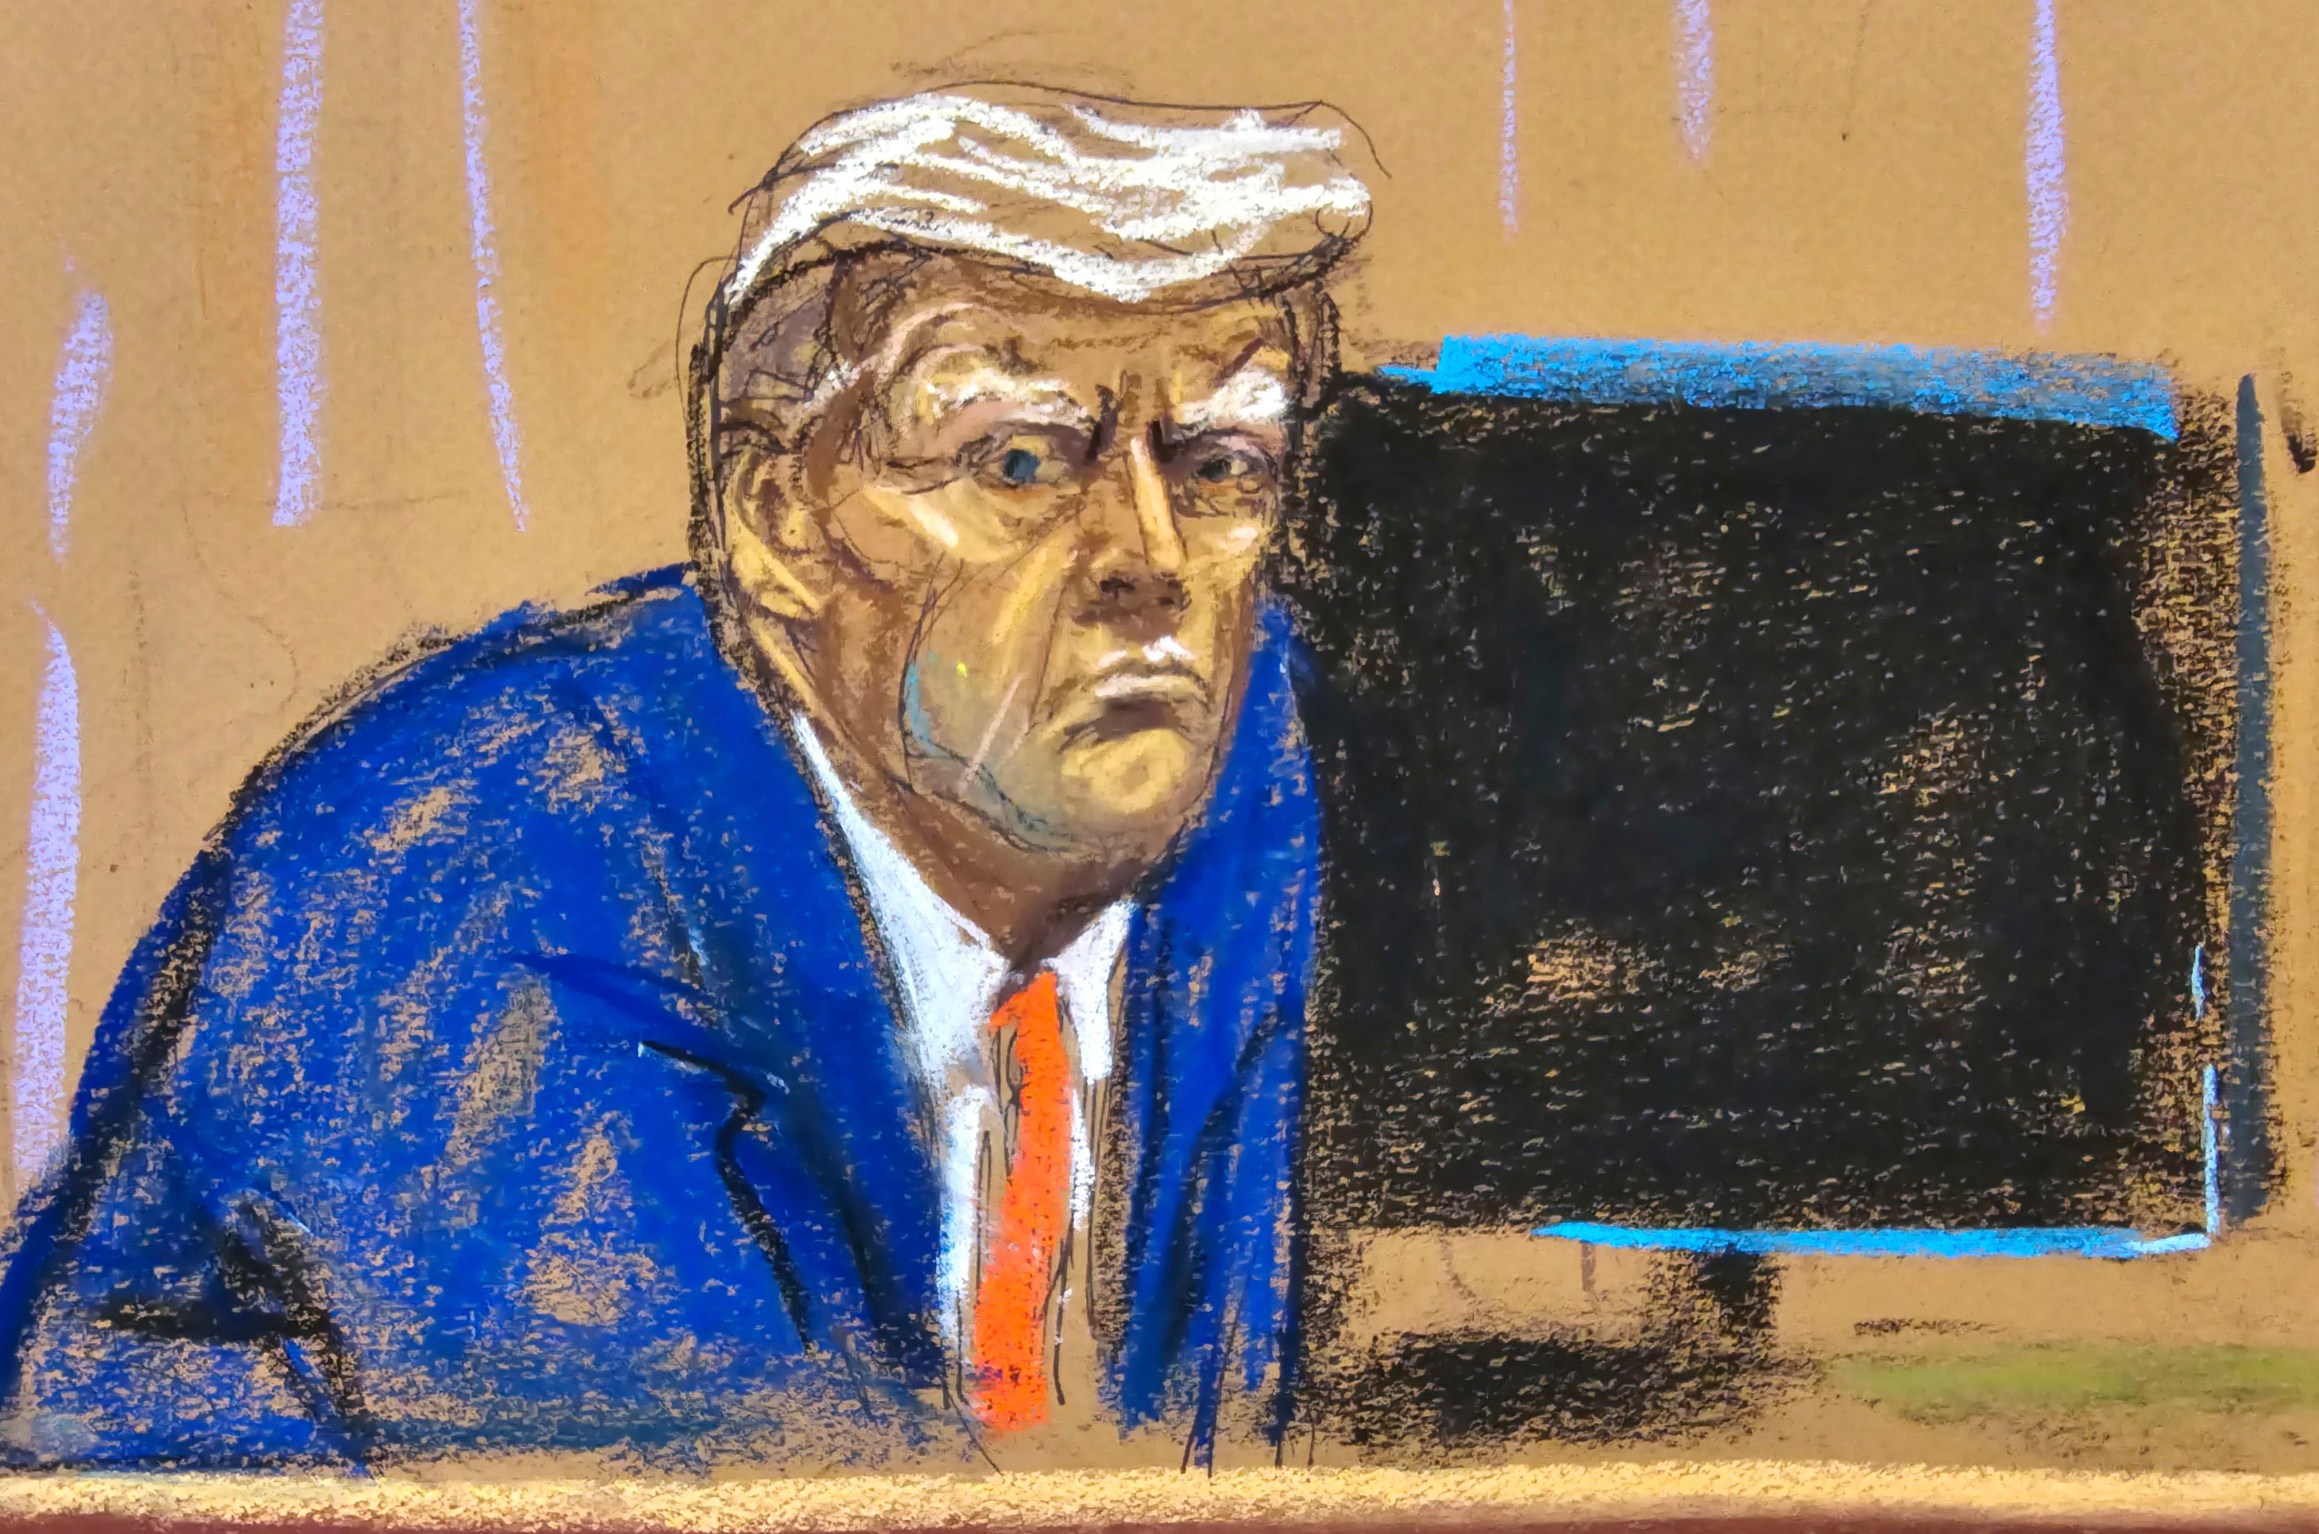 A sketch of Trump from day one